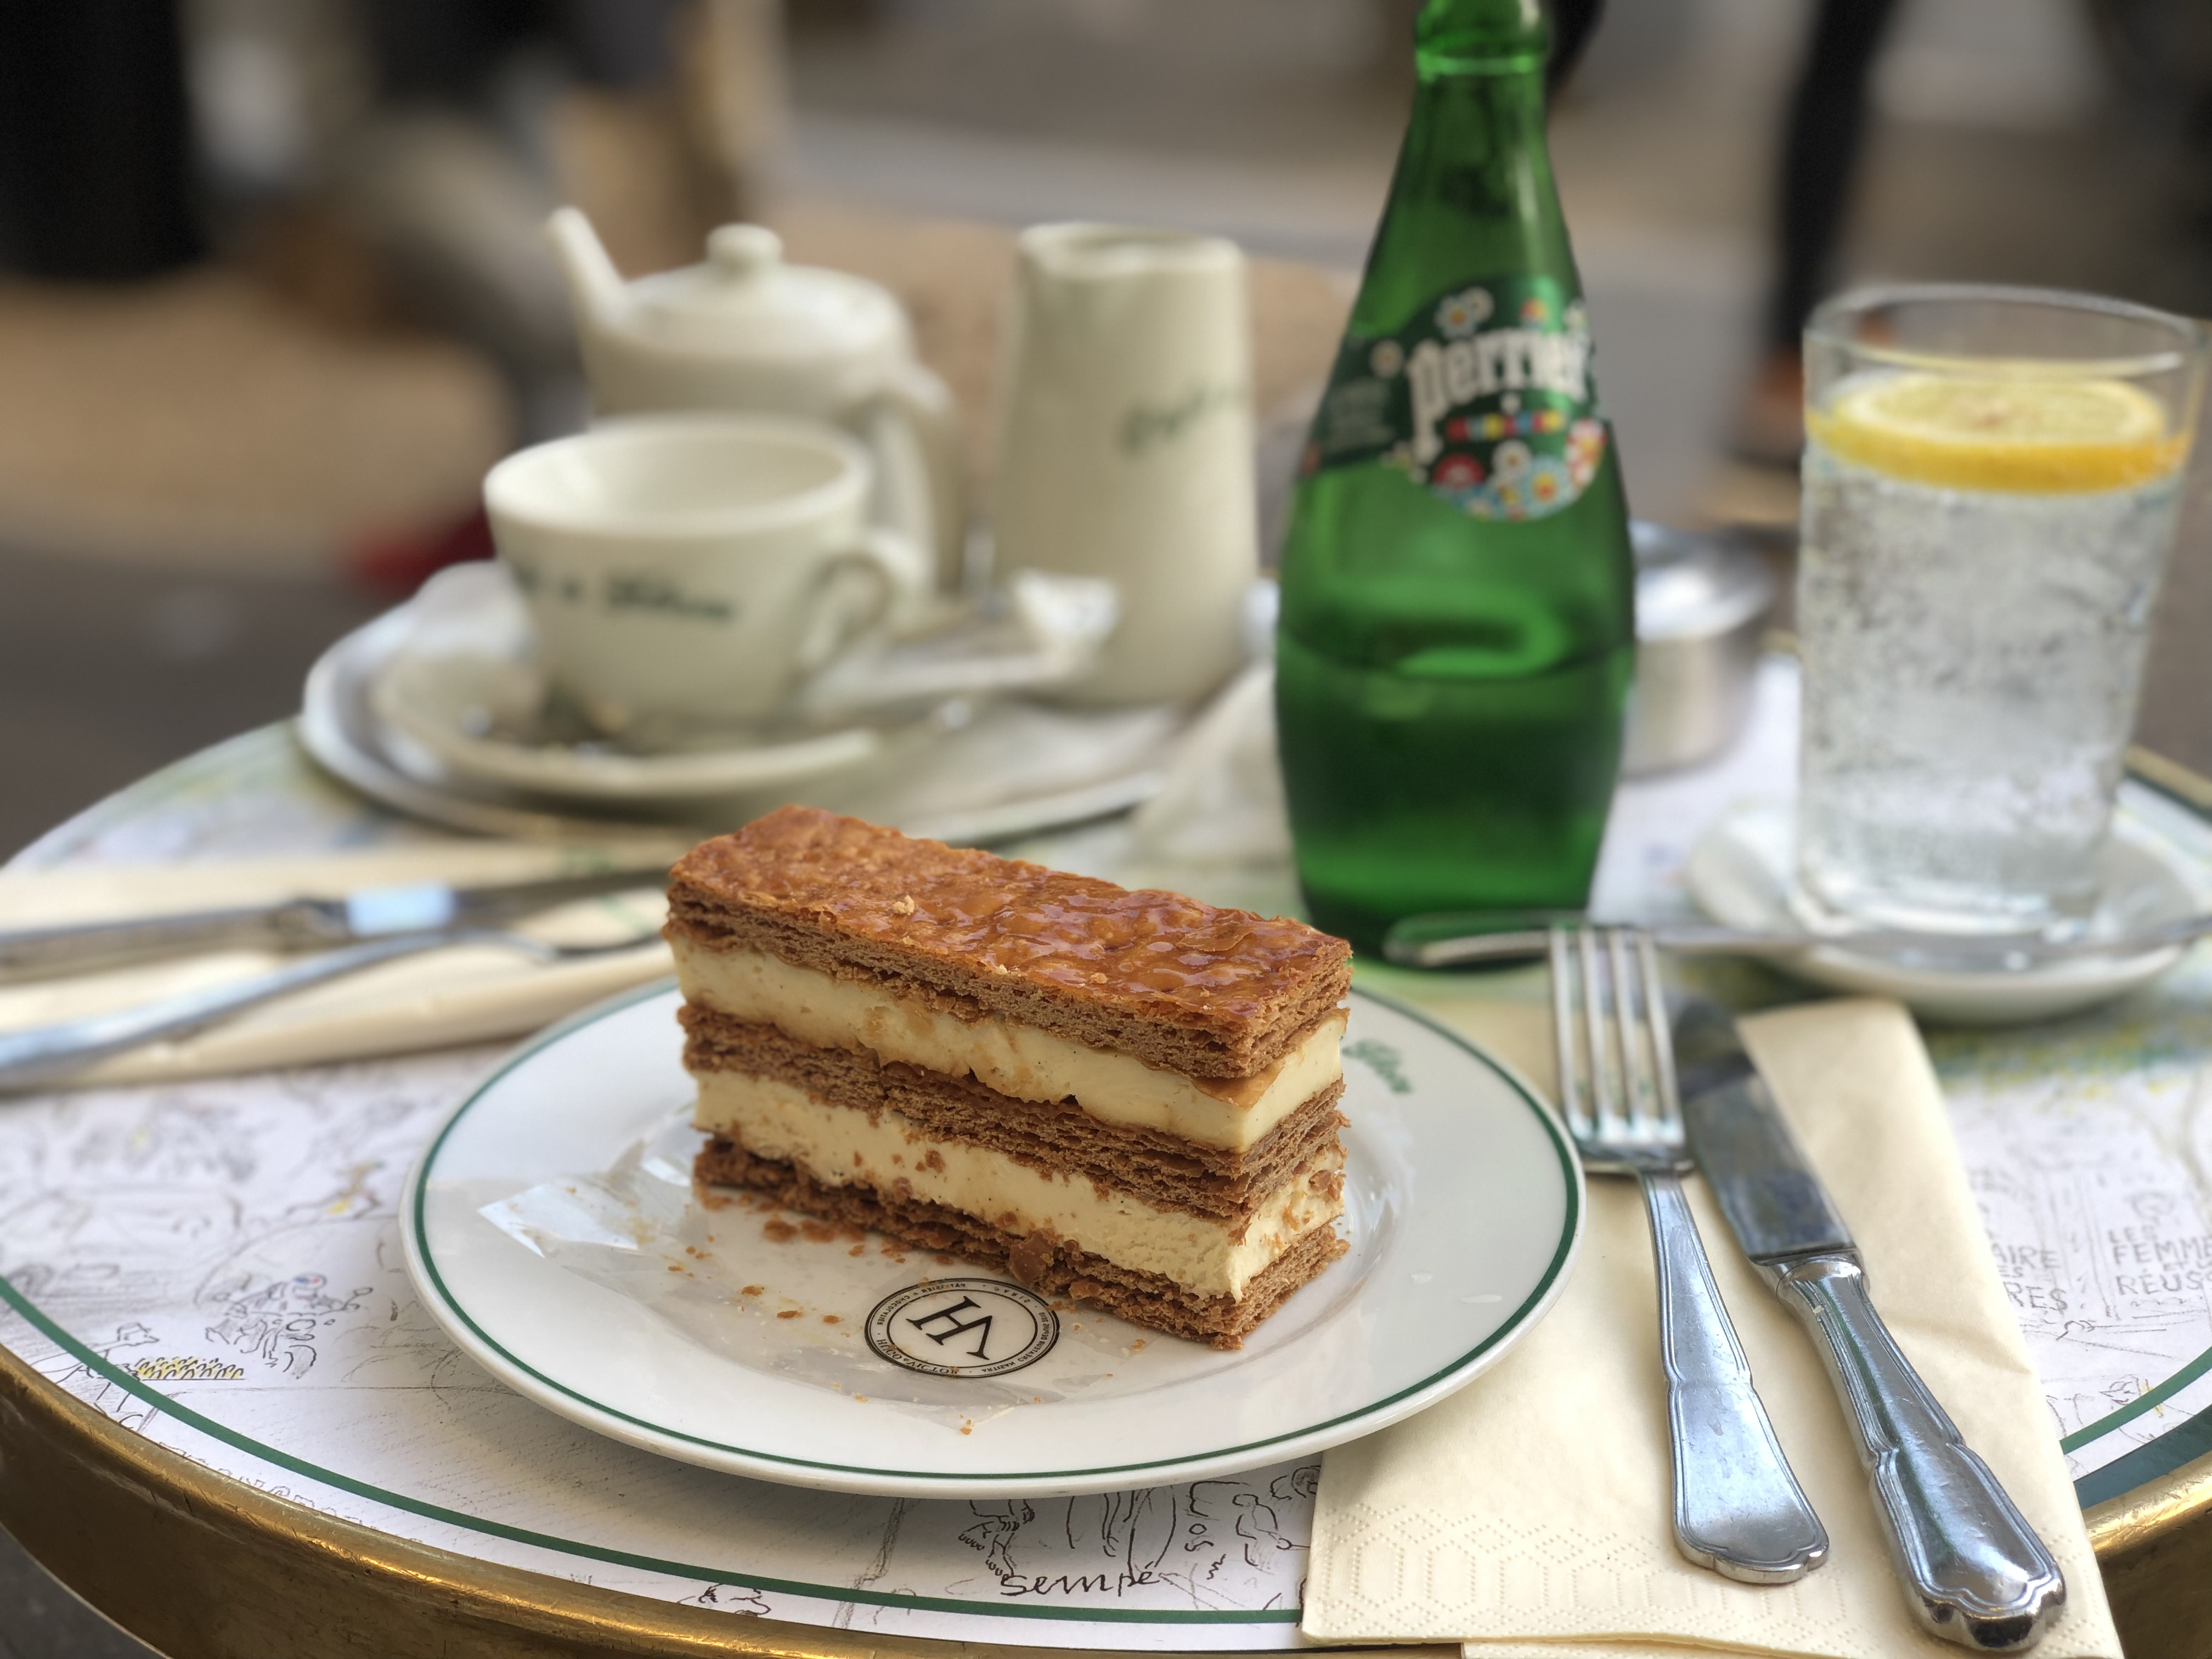 Cafe Flore,カフェフロール,パリのカフェ